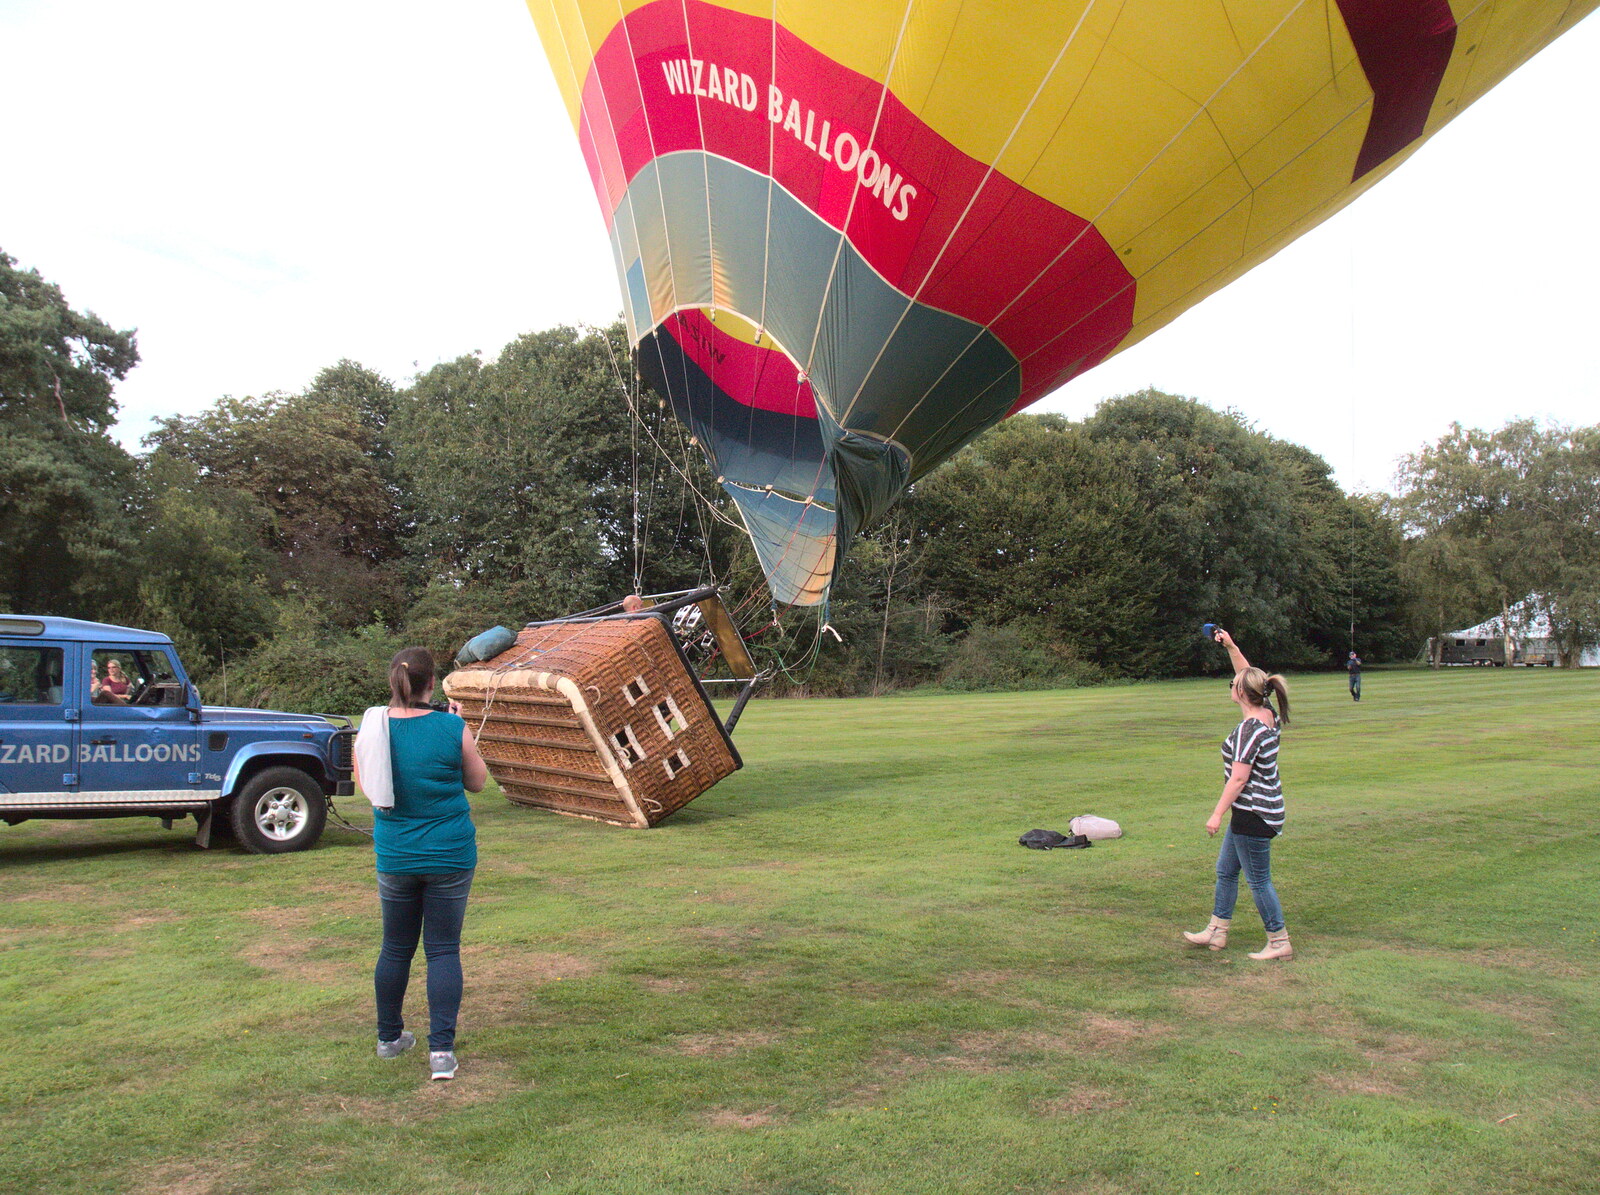 The BSCC at Yaxley and the Hoxne Beer Festival, Suffolk - 31st August 2017: The basket lifts off